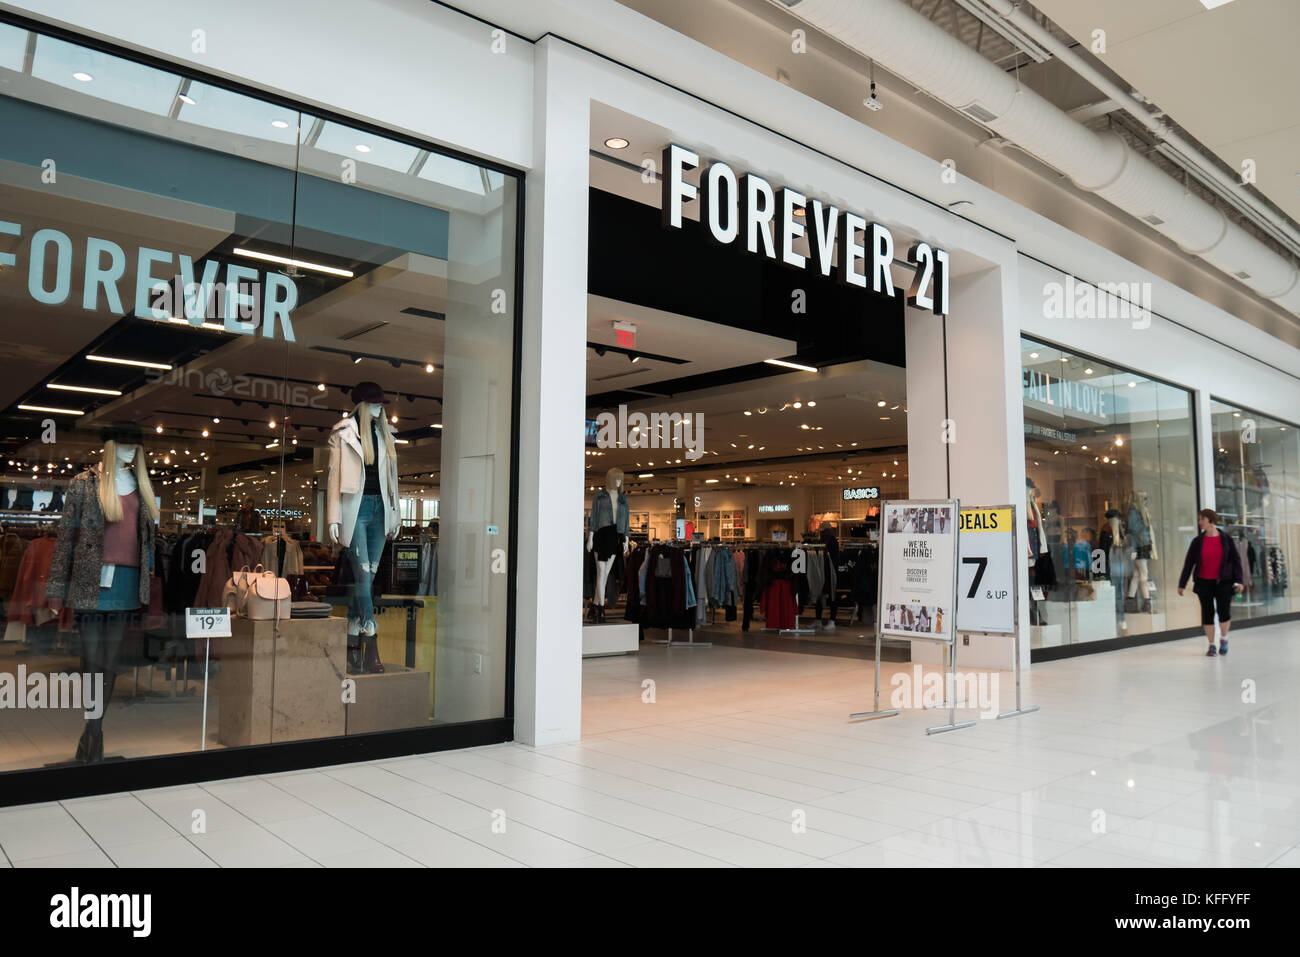 forever 21 store Stock Photo - Alamy